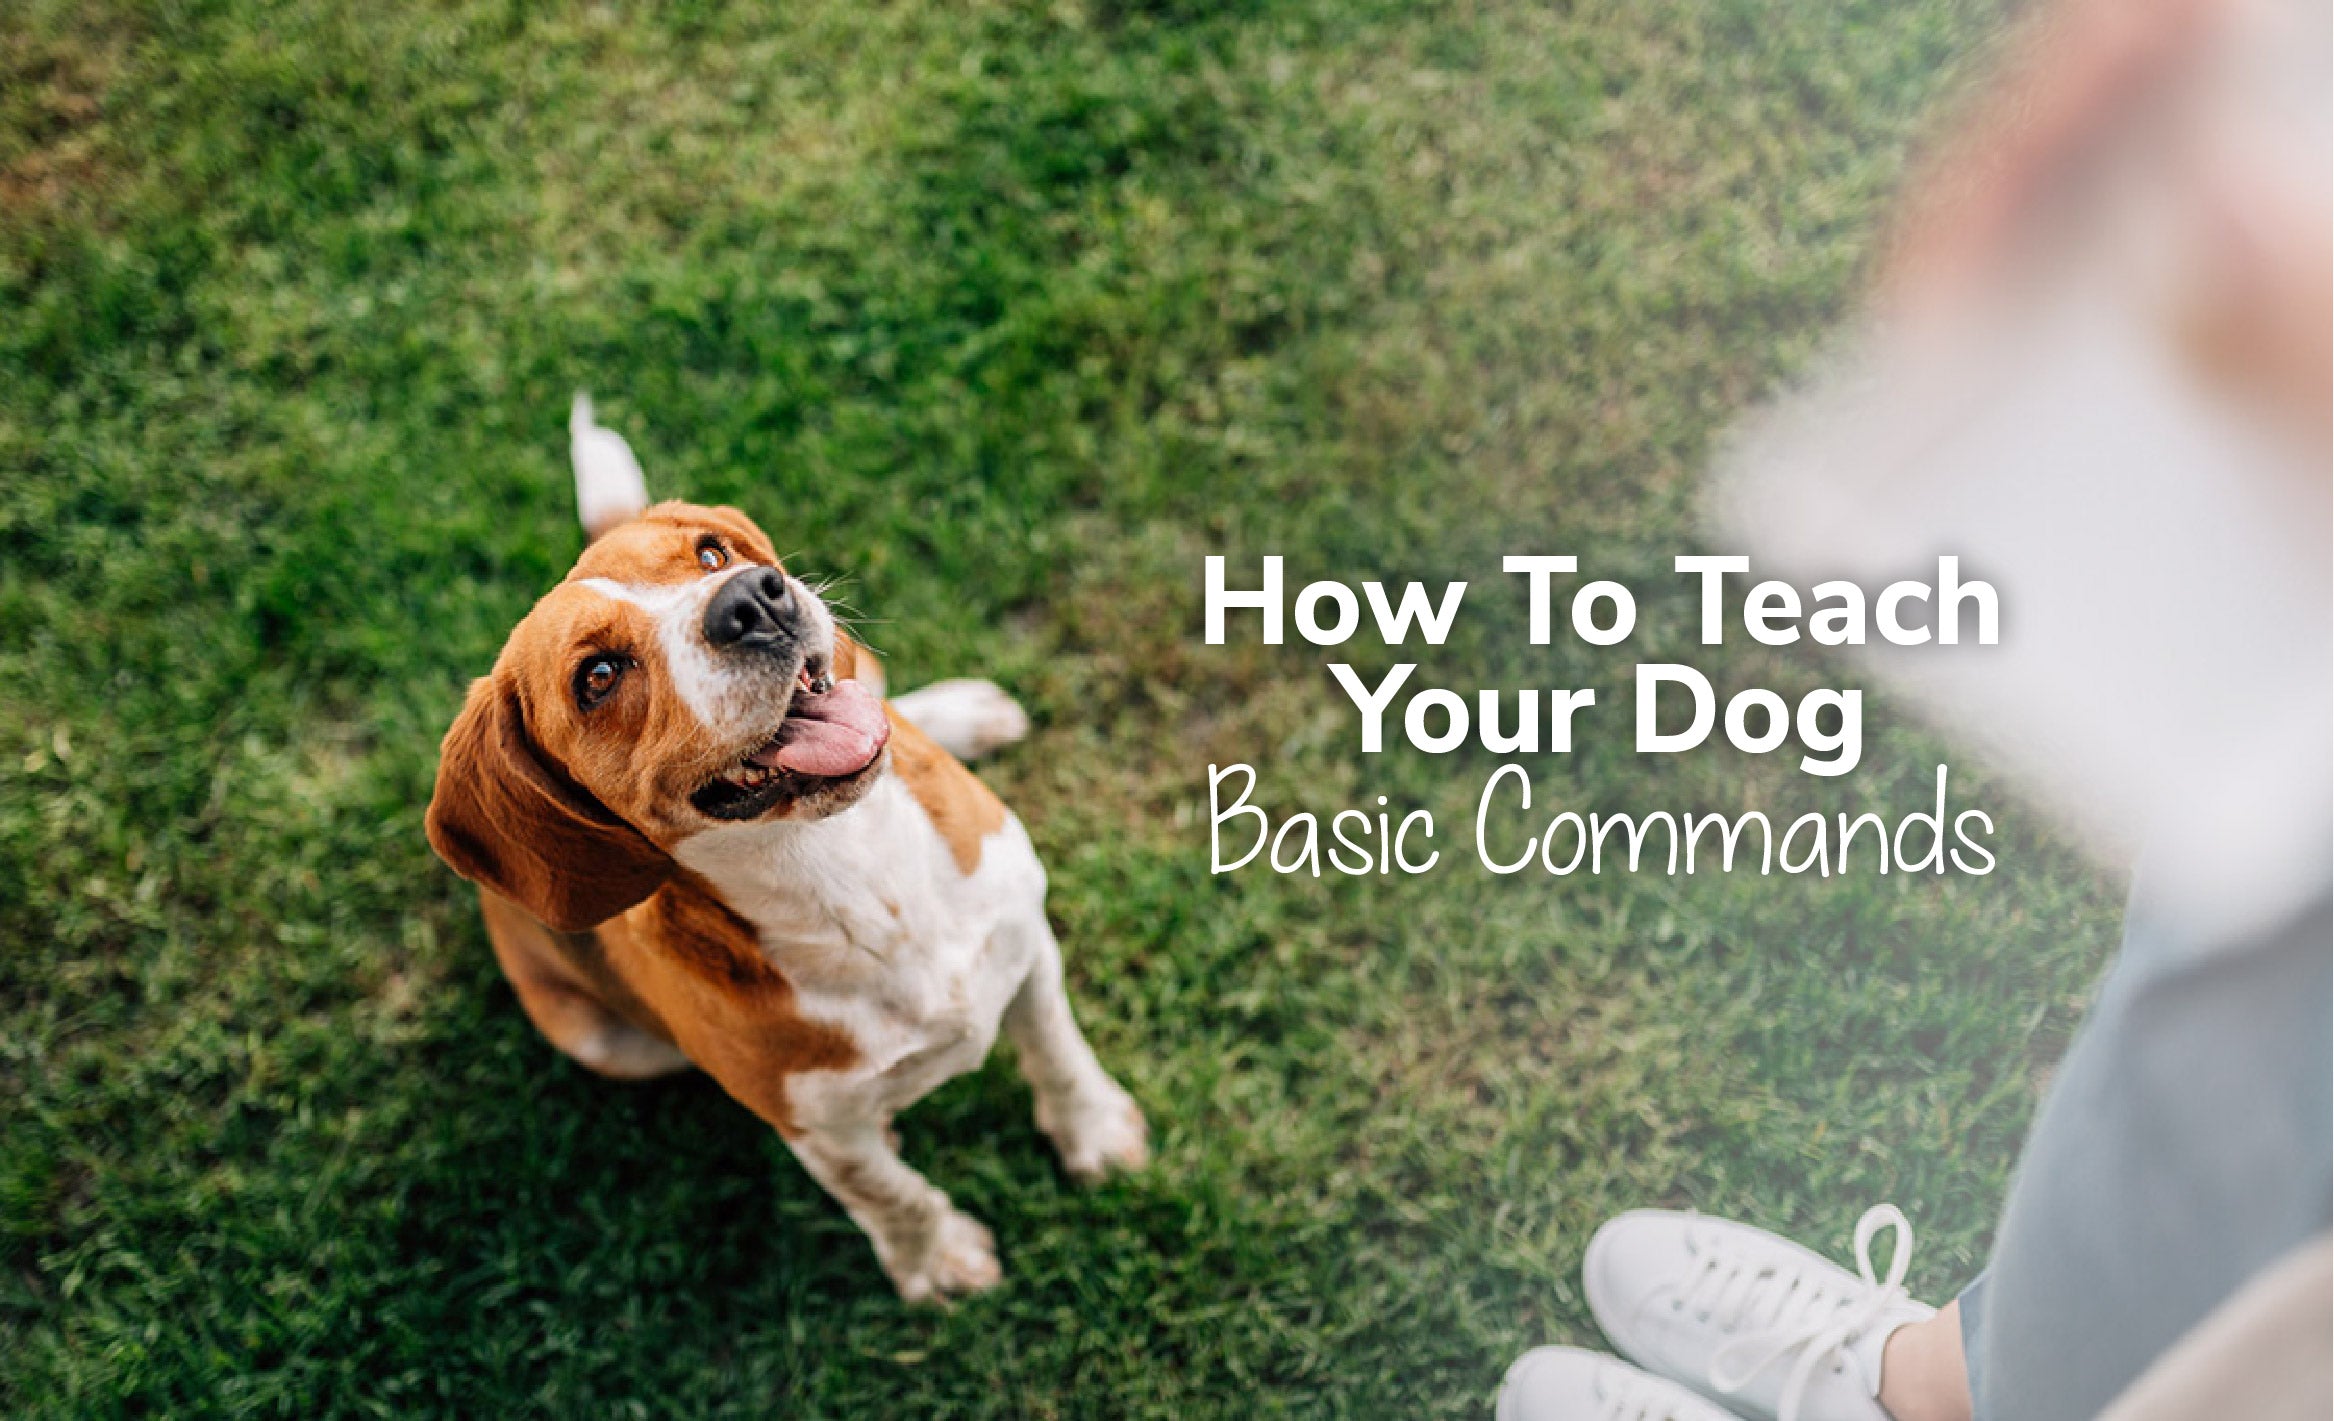 How To Teach Your Dog Basic Commands